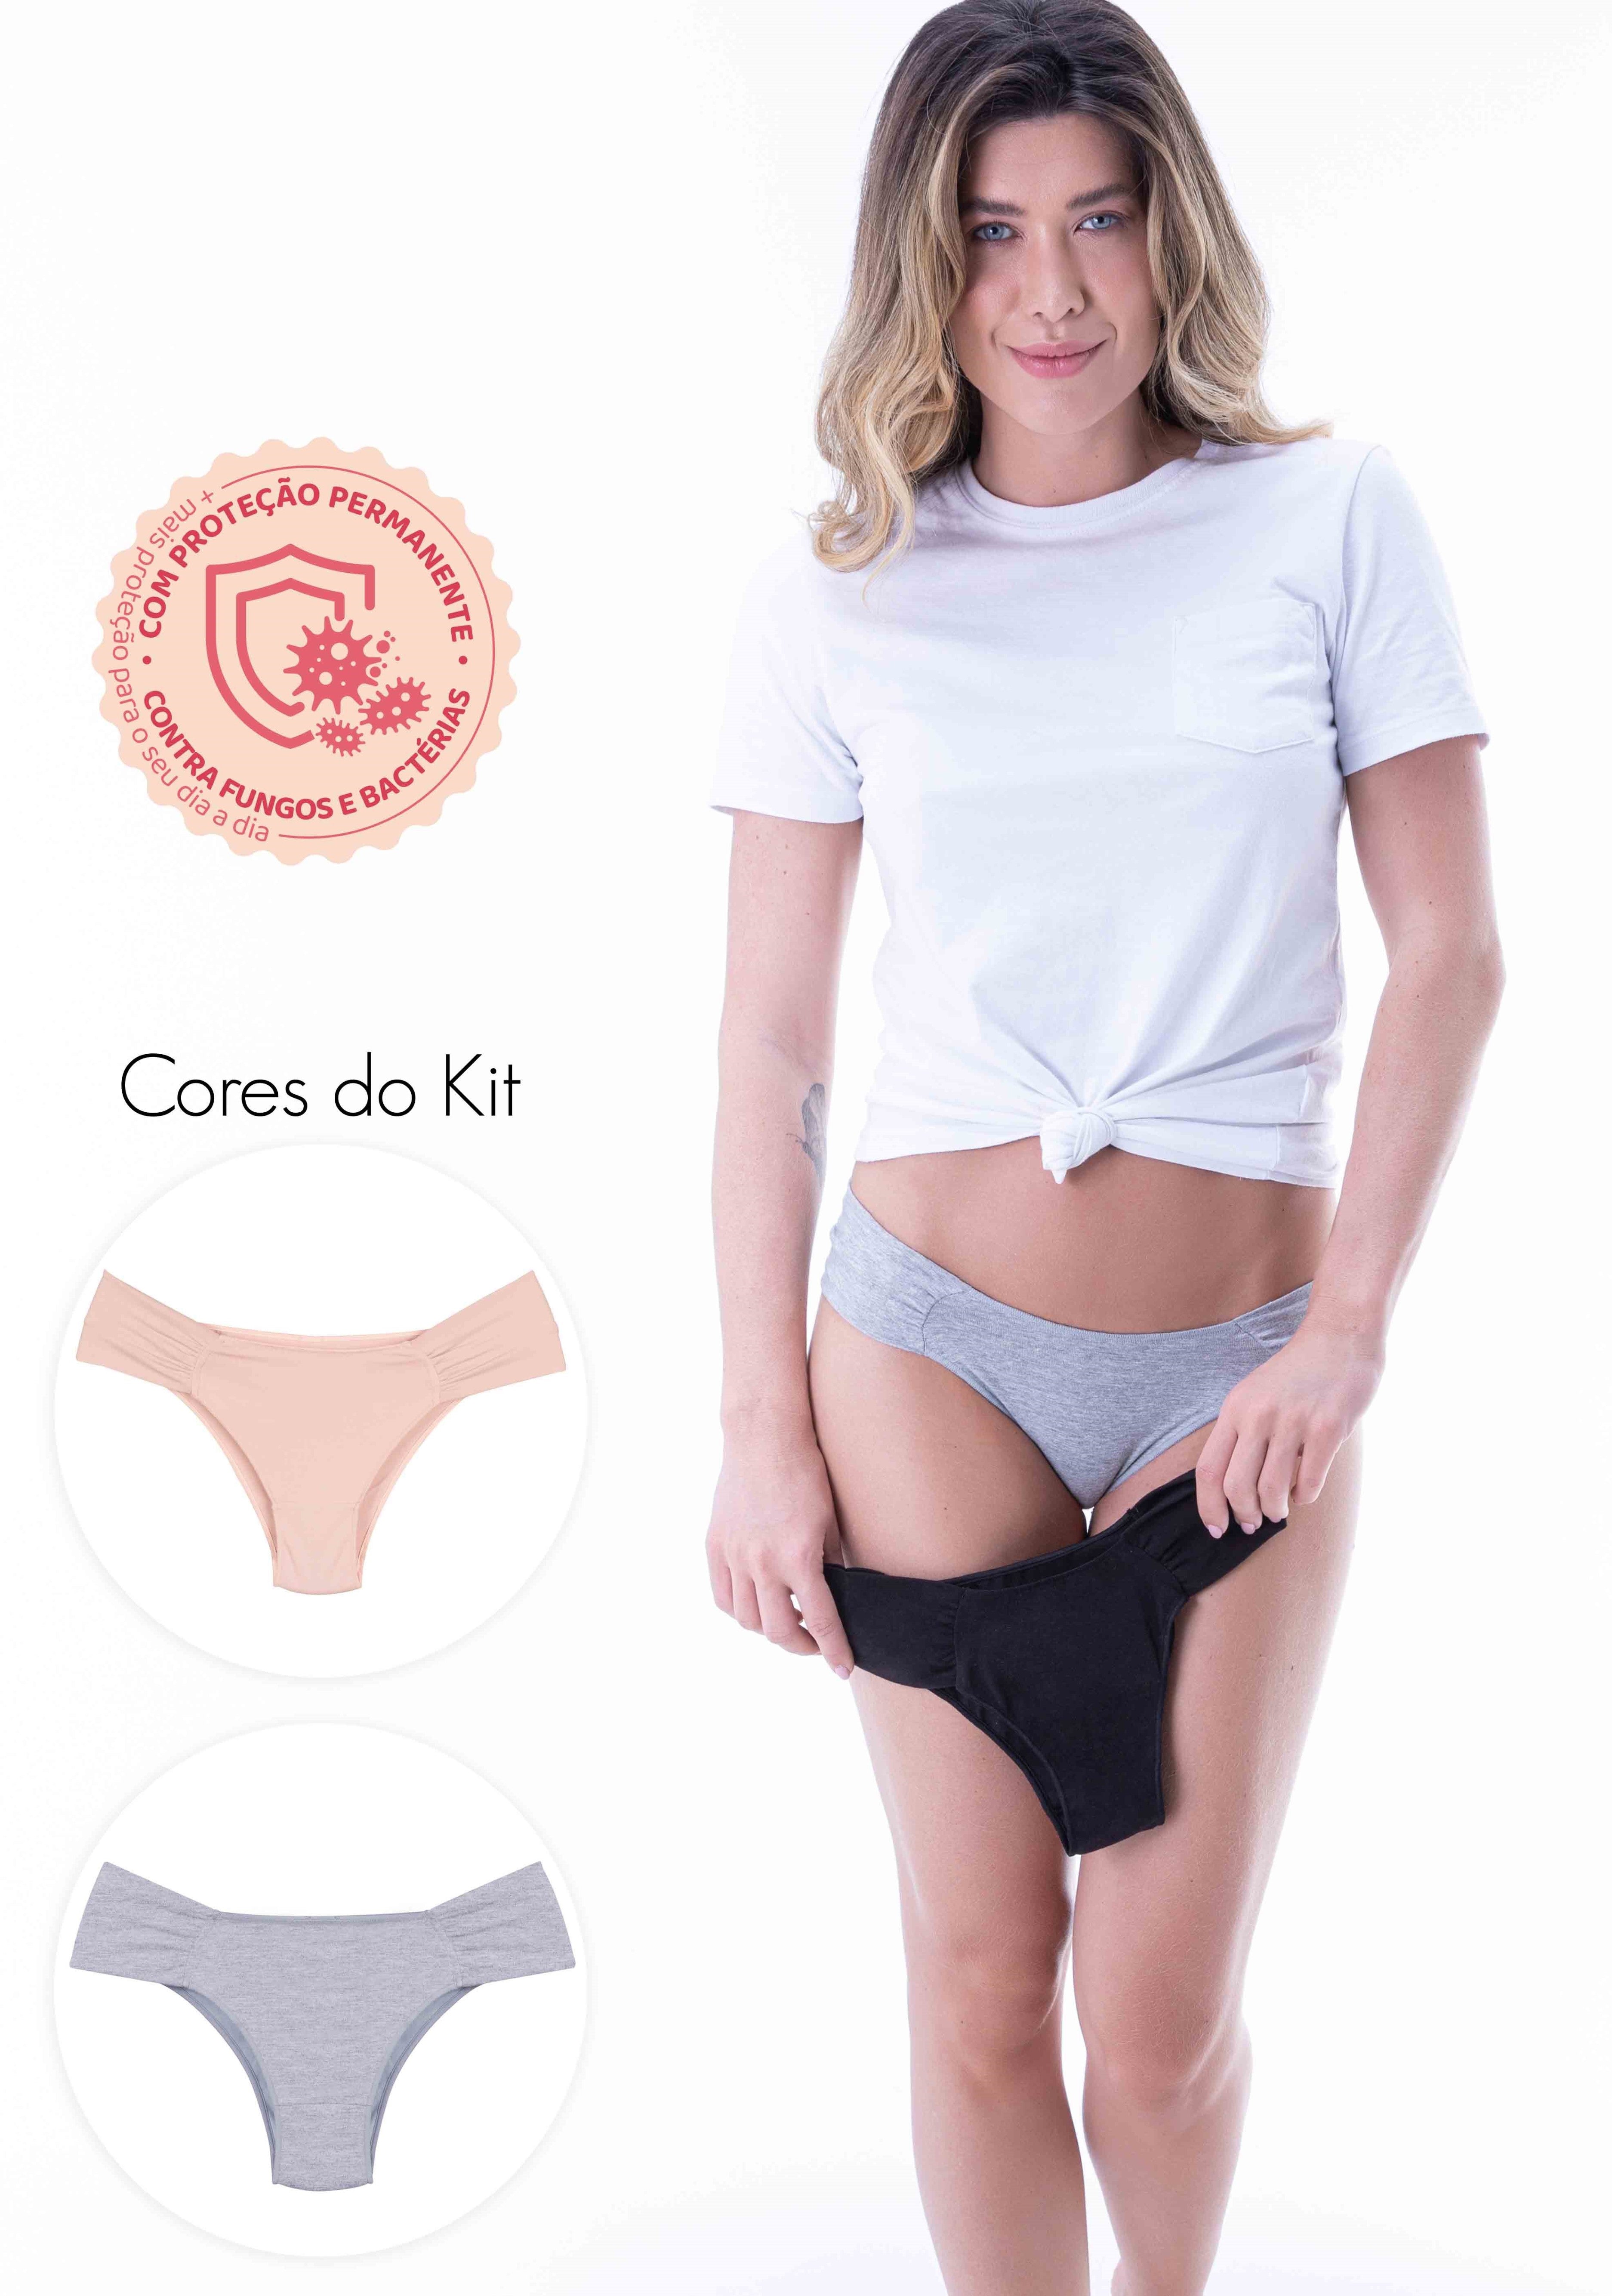 NEW COTTON WOMEN PANTIES COMBO PACK OF 6 FOR